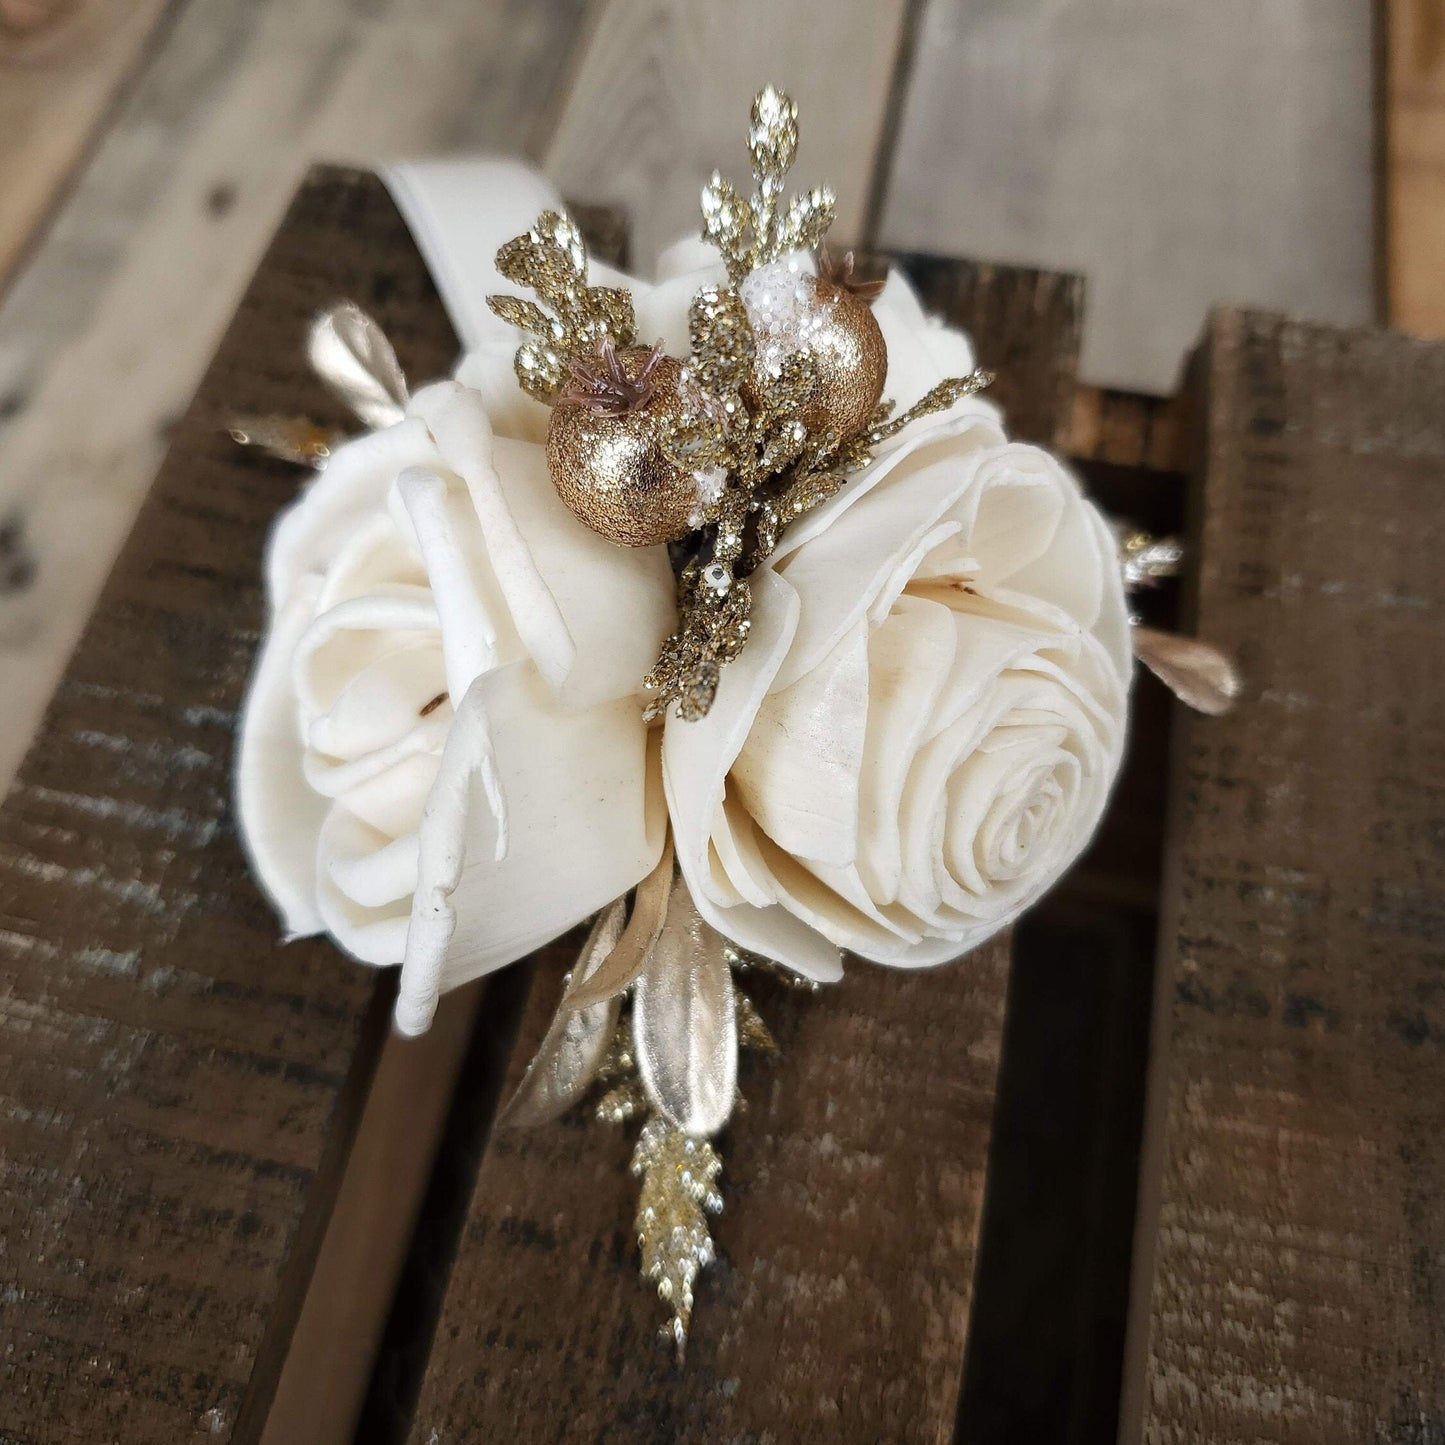 Gold Glitter Wrist or Pinned Corsage made with Sola Wood Flowers, Color Options Available